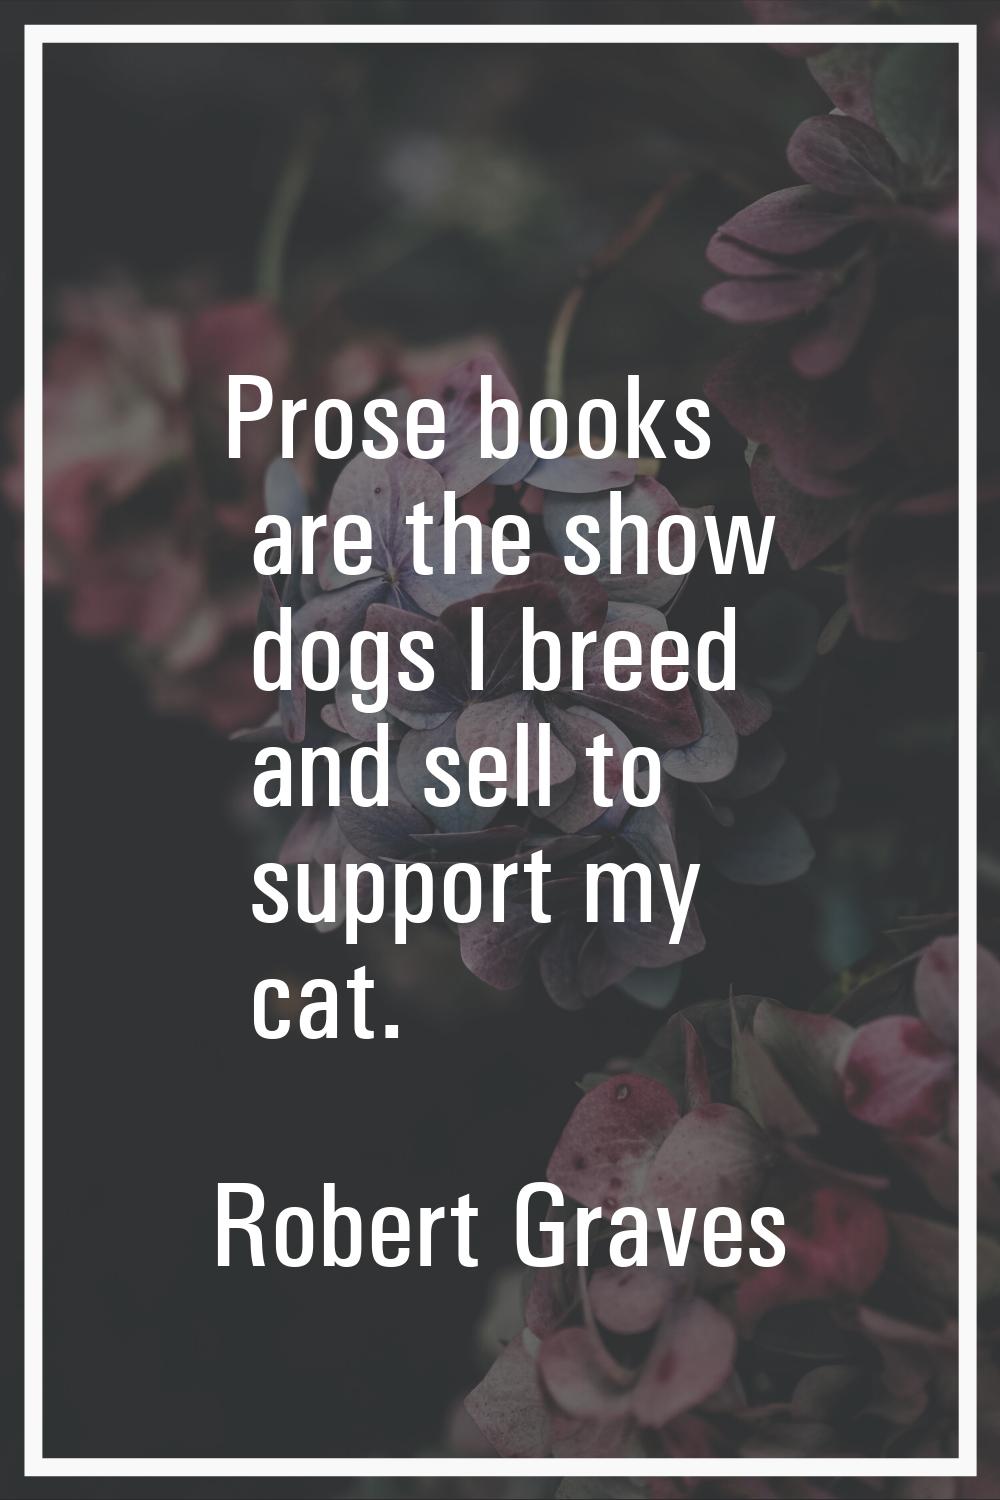 Prose books are the show dogs I breed and sell to support my cat.